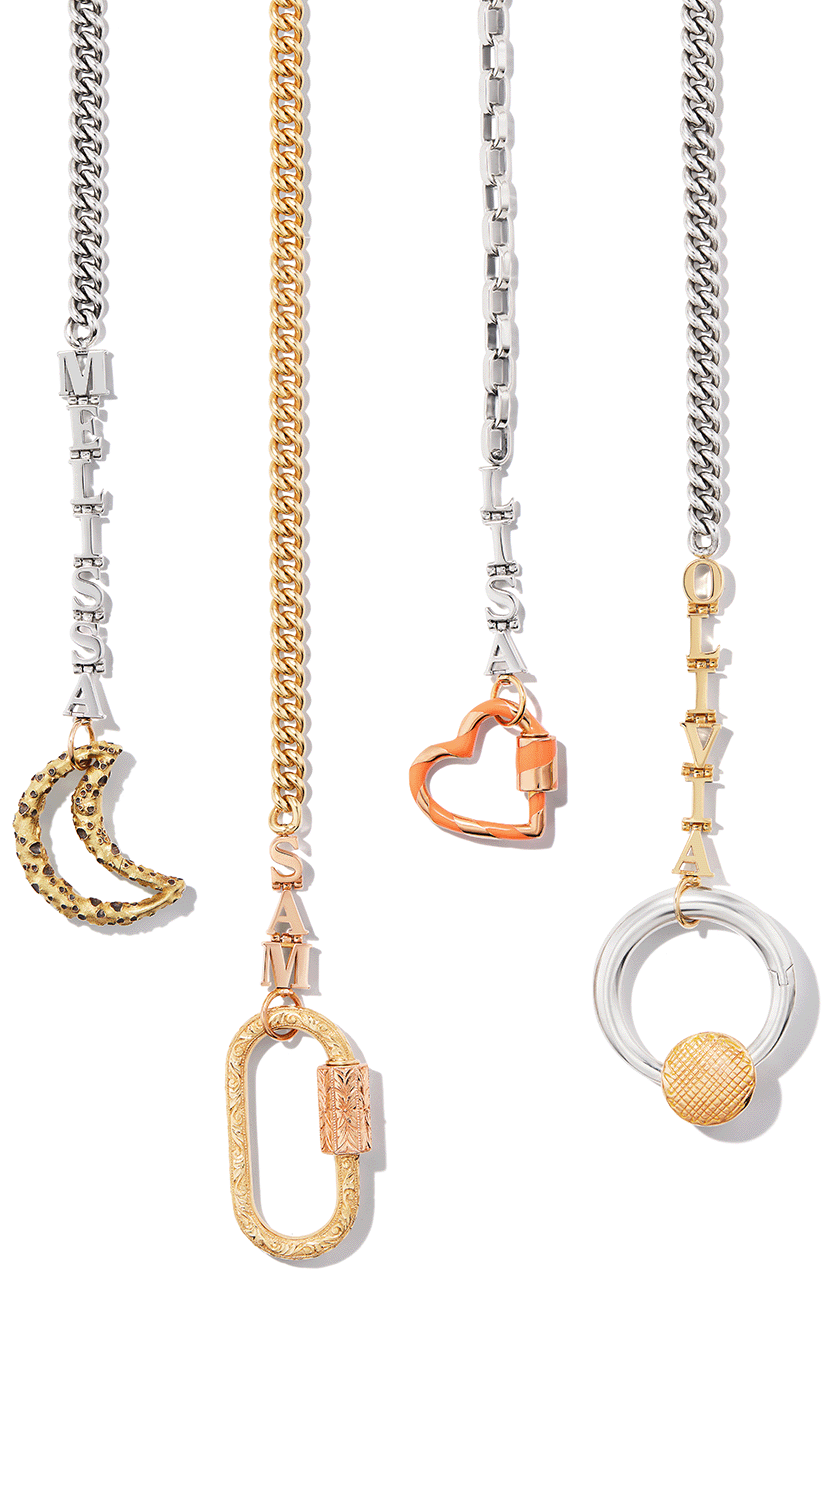 Transparent Acrylic Spike Chain Necklace Clear Chain Lock Pendants